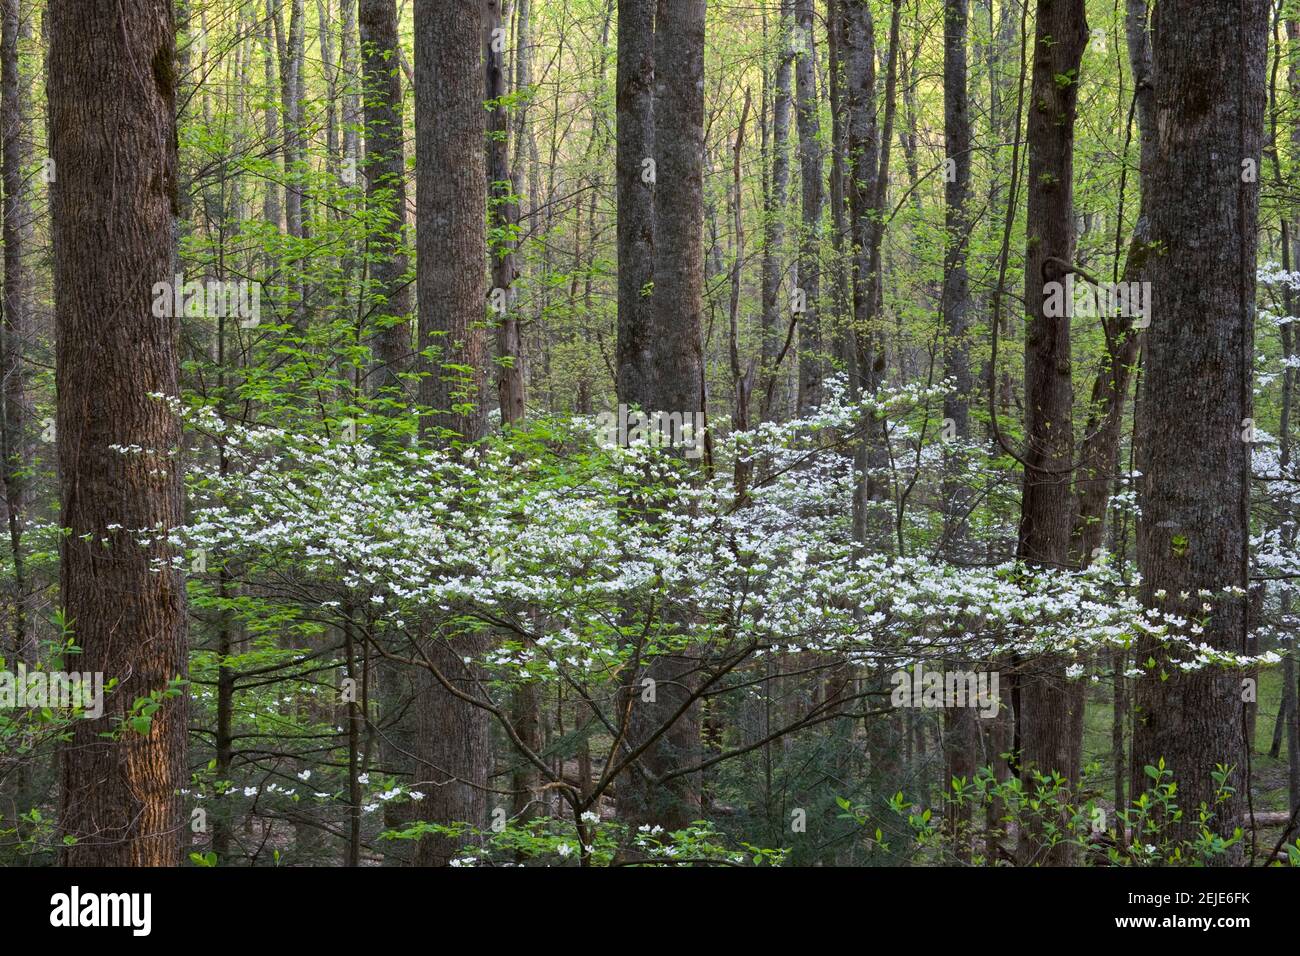 Dogwood trees in a forest, Little River, Tremont, Great Smoky Mountains National Park, Tennessee, USA Stock Photo